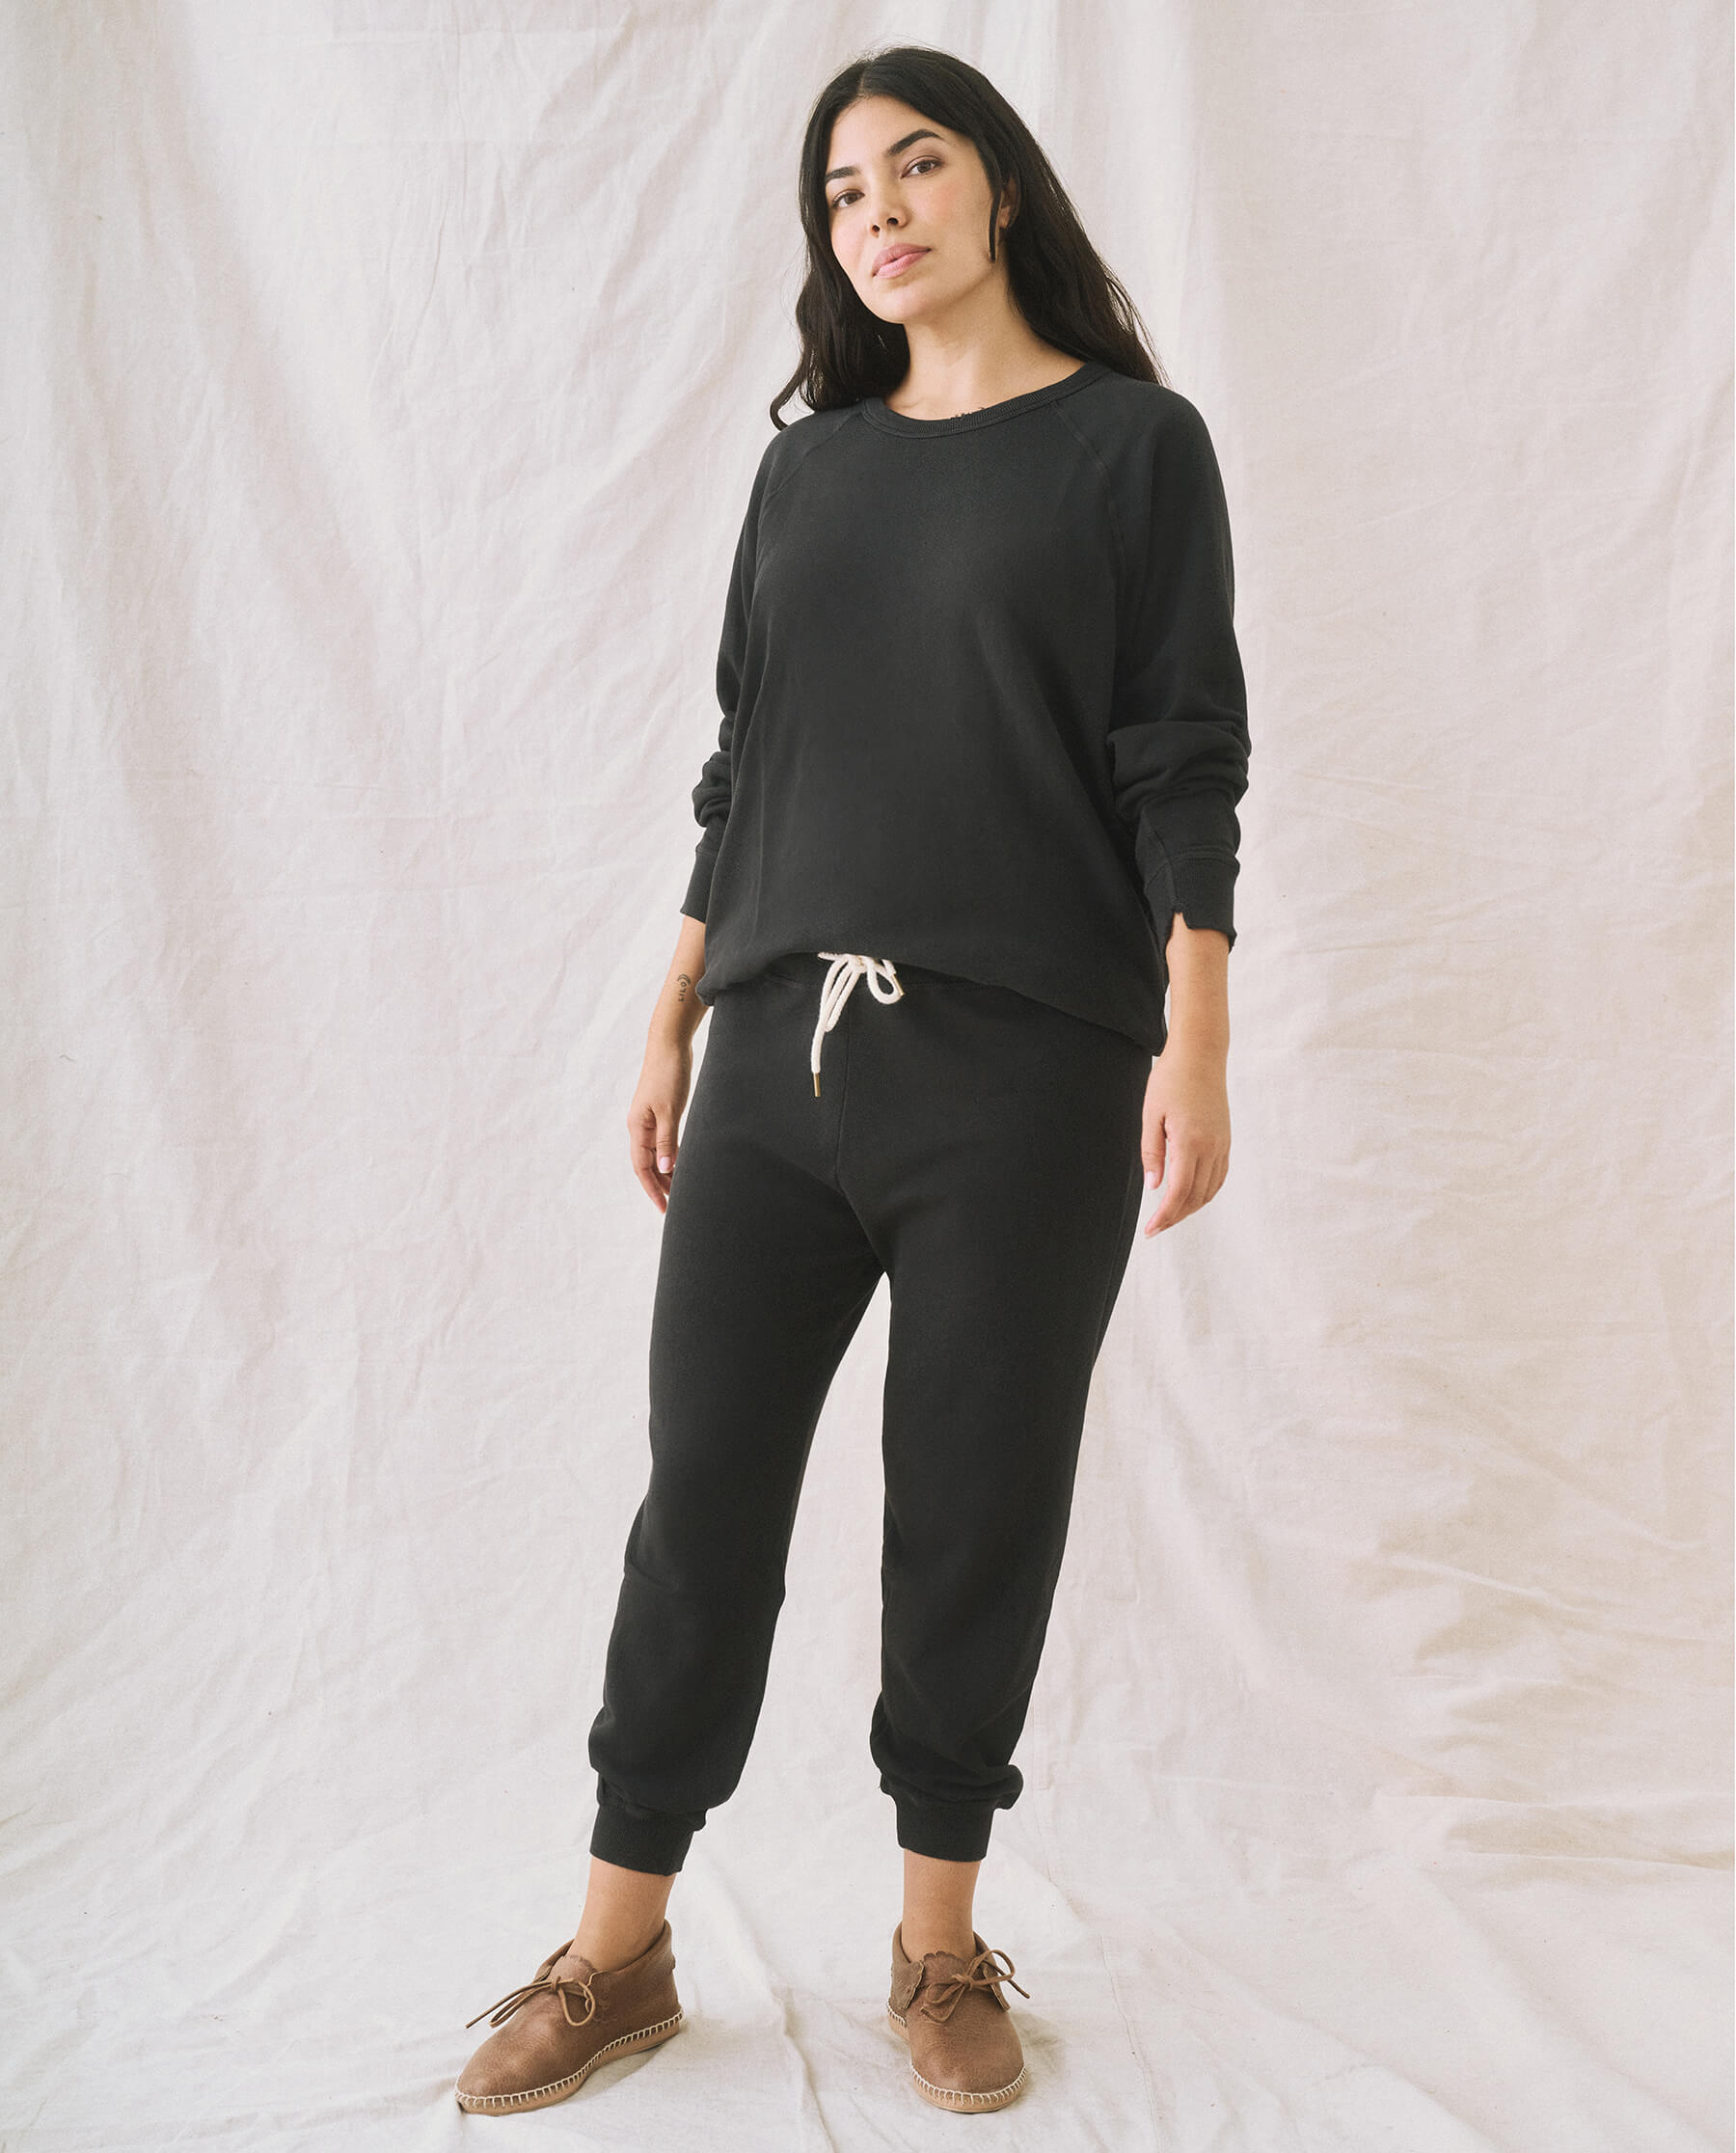 The Cropped Sweatpant. Solid -- Almost Black SWEATPANTS THE GREAT. CORE KNITS